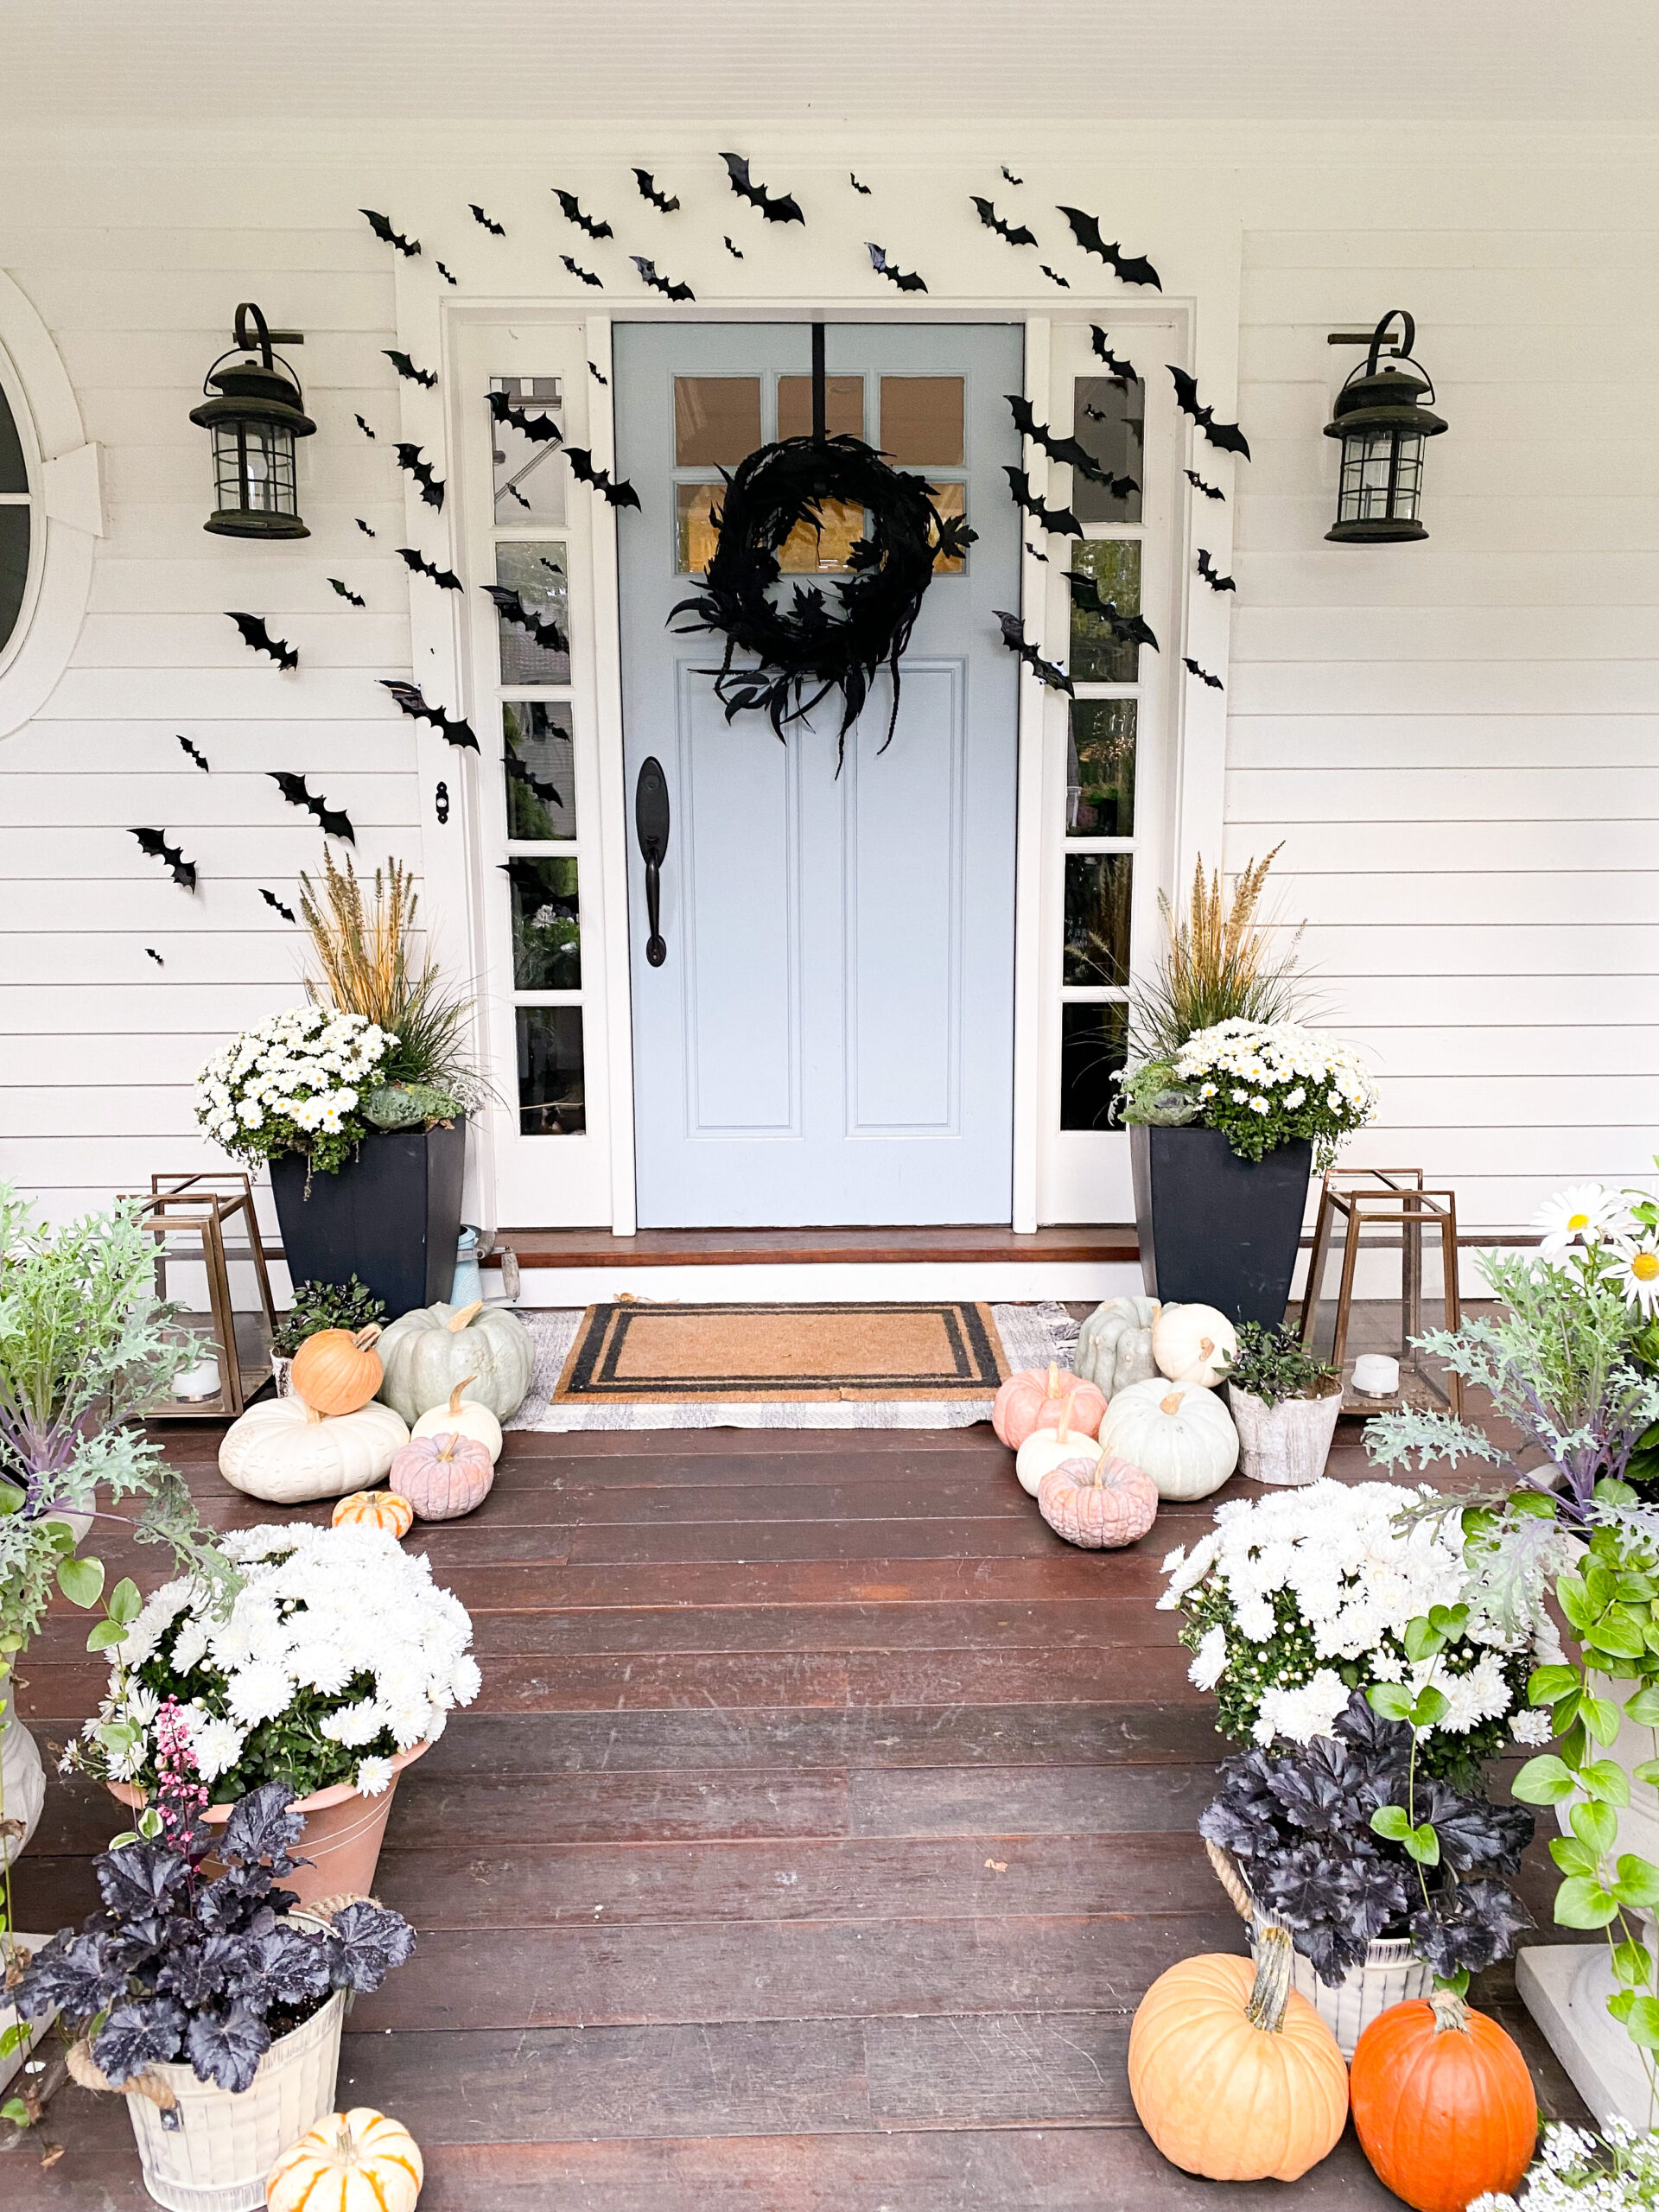 Halloween porch and home from FALL to Halloween! See how I transformed out home with skulls and bats and lots of pumpkins. || Darling Darleen Top CT Lifestyle Blogger